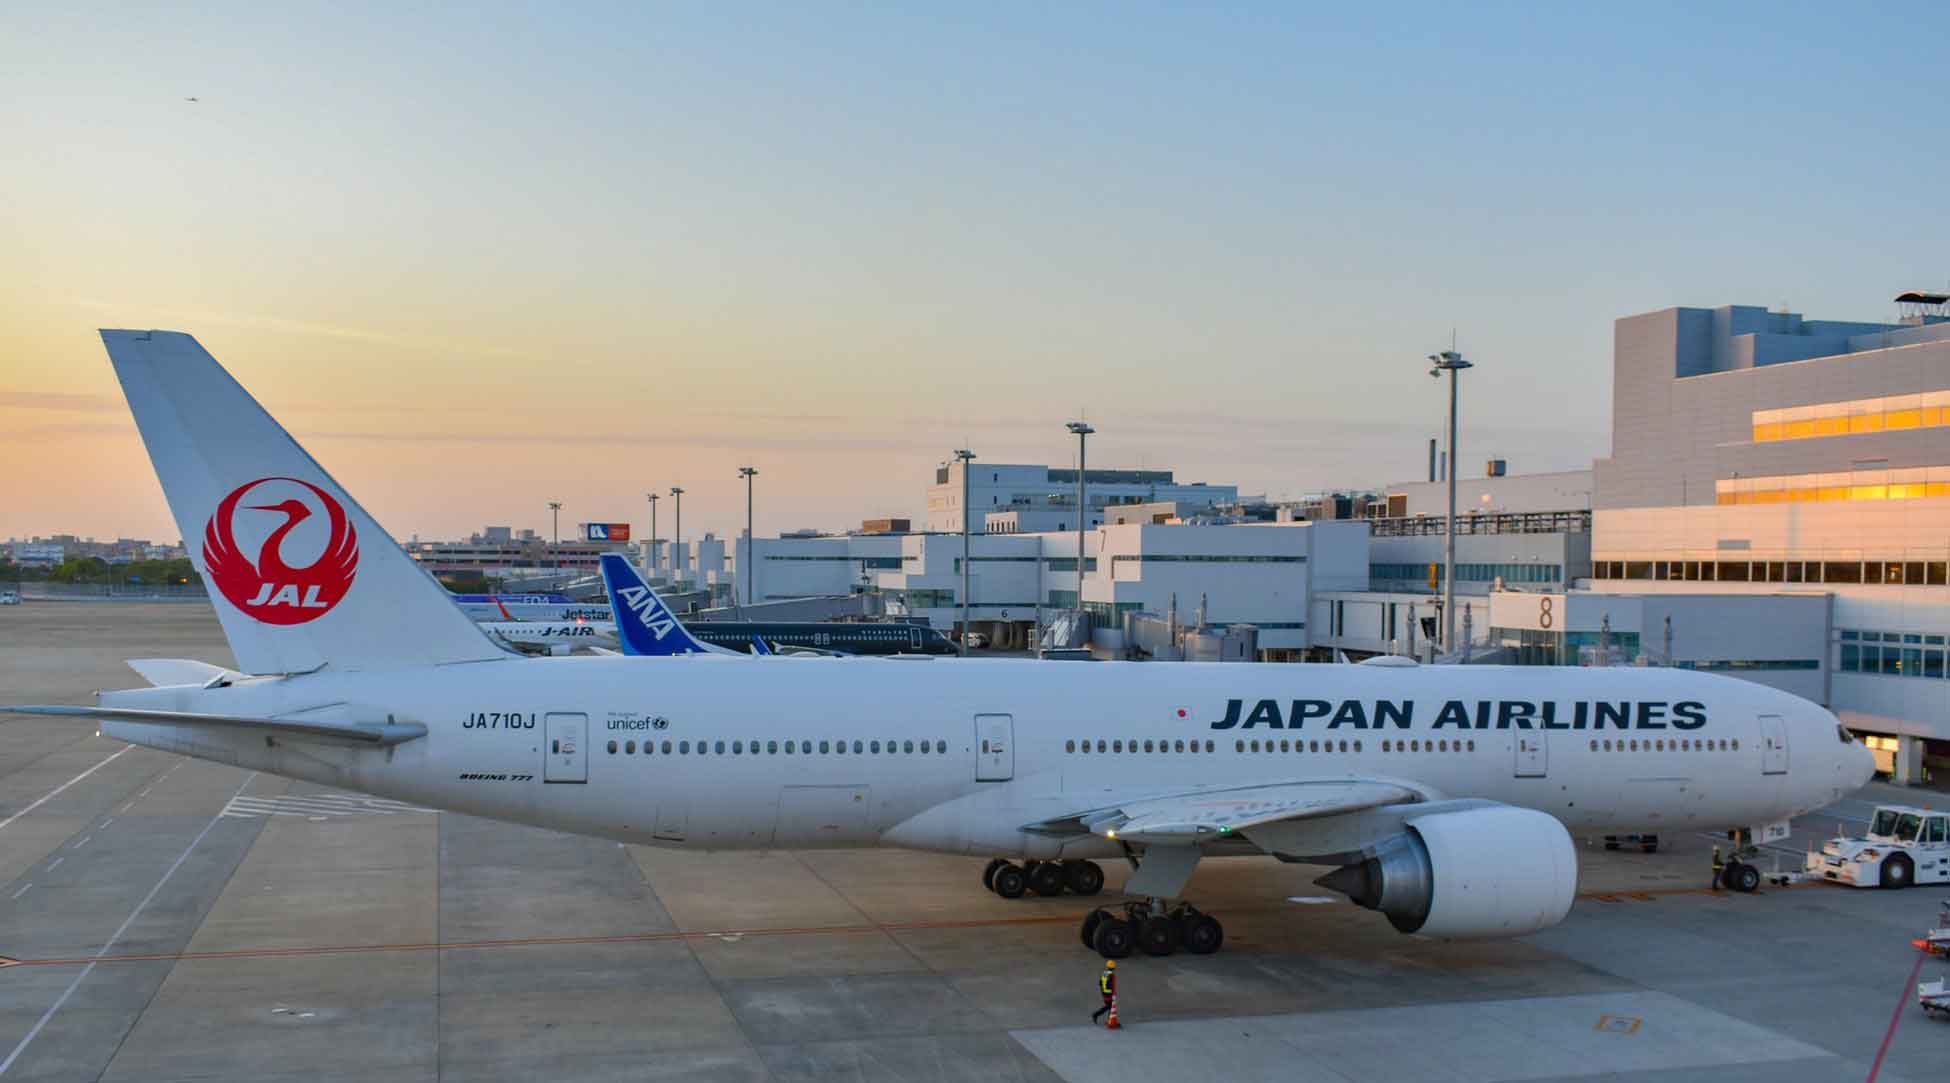 A view of the Tokyo airport